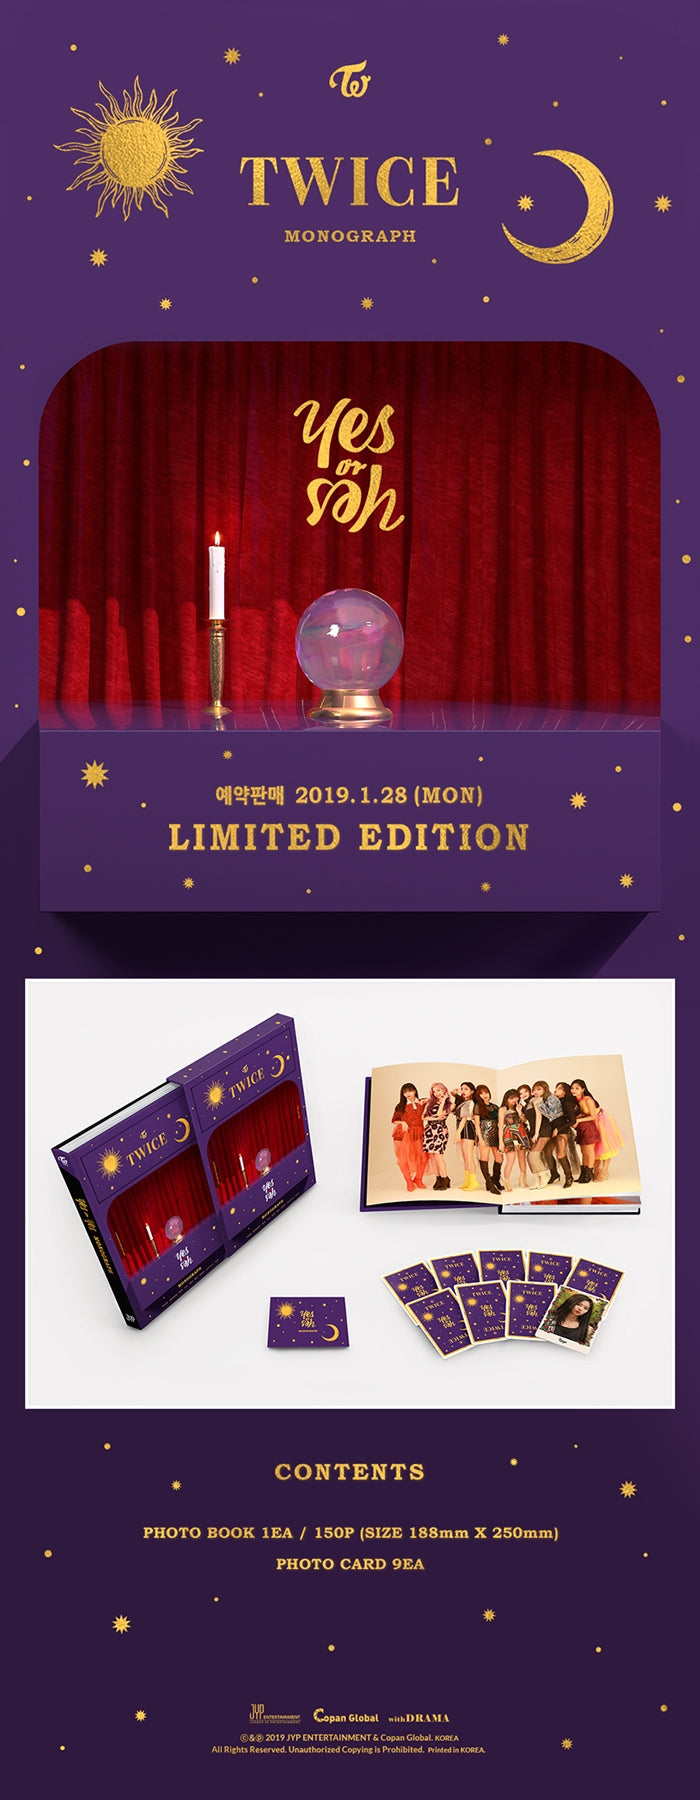 TWICE MONOGRAPH YES or YES TWICE 6th mini album YES or YES production story TWICE MONOGRAPH 150p photo book + 9 photo card...